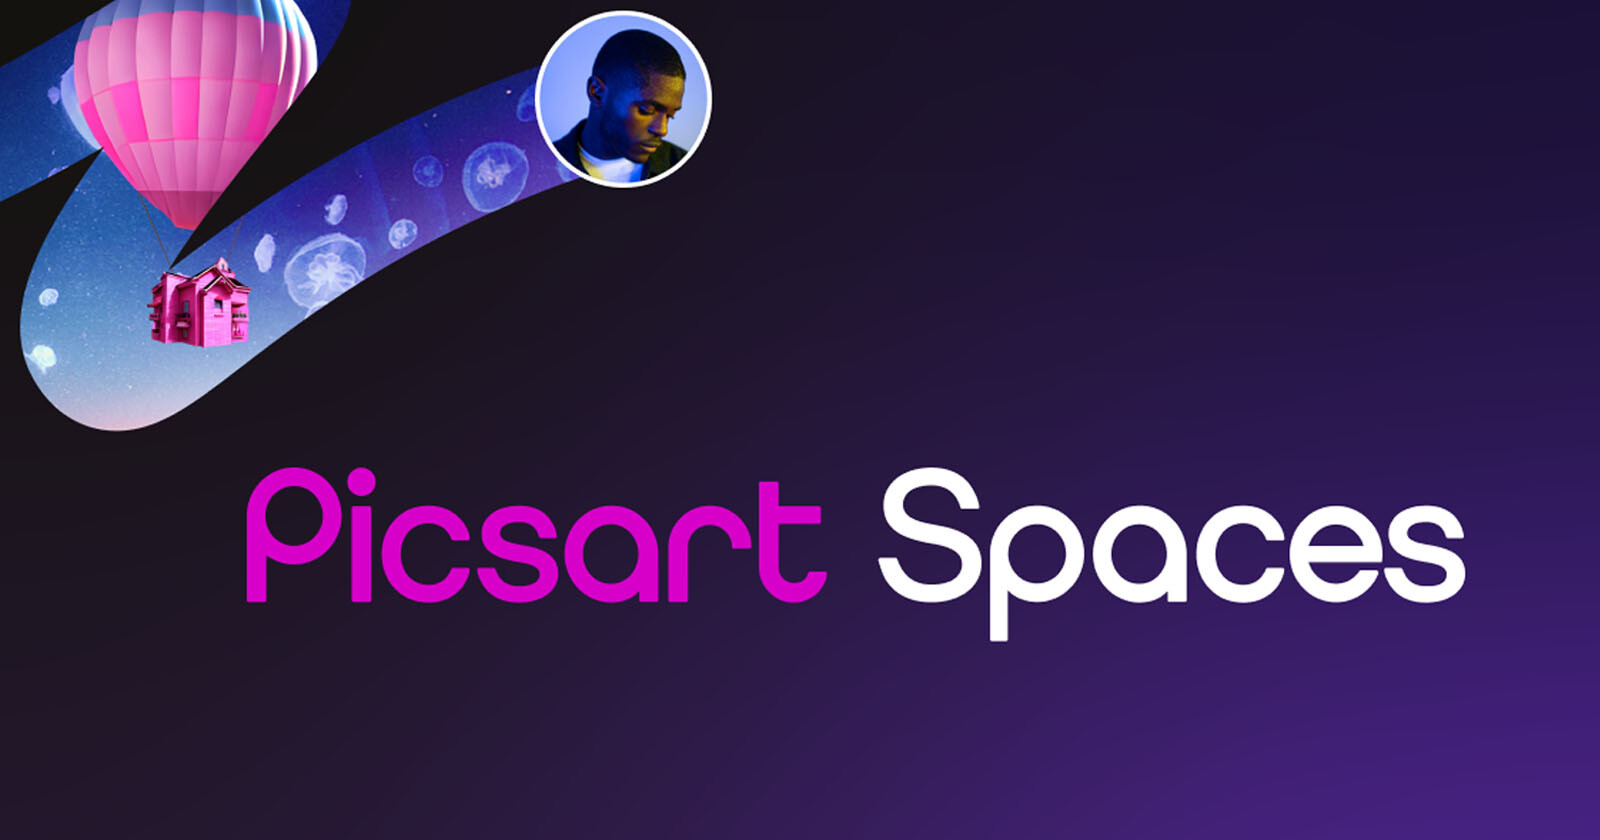 Picsart is Adding an In-App Community Feature Called Spaces